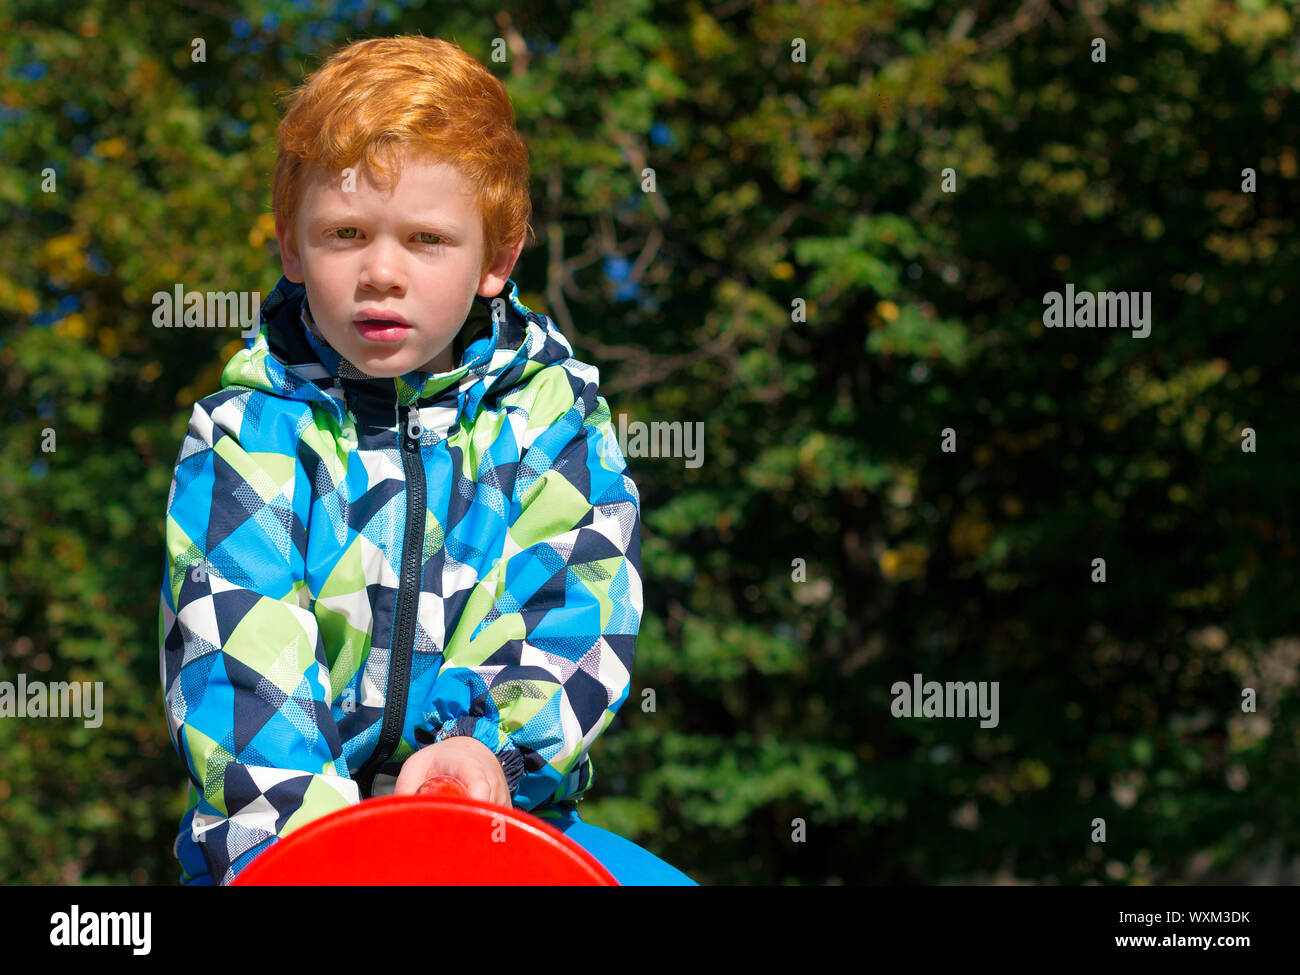 Child playing on outdoor playground. Boy play on school or kindergarten yard. Kid with curly ginger hair. Portrait. The red-haired boy stares intently Stock Photo